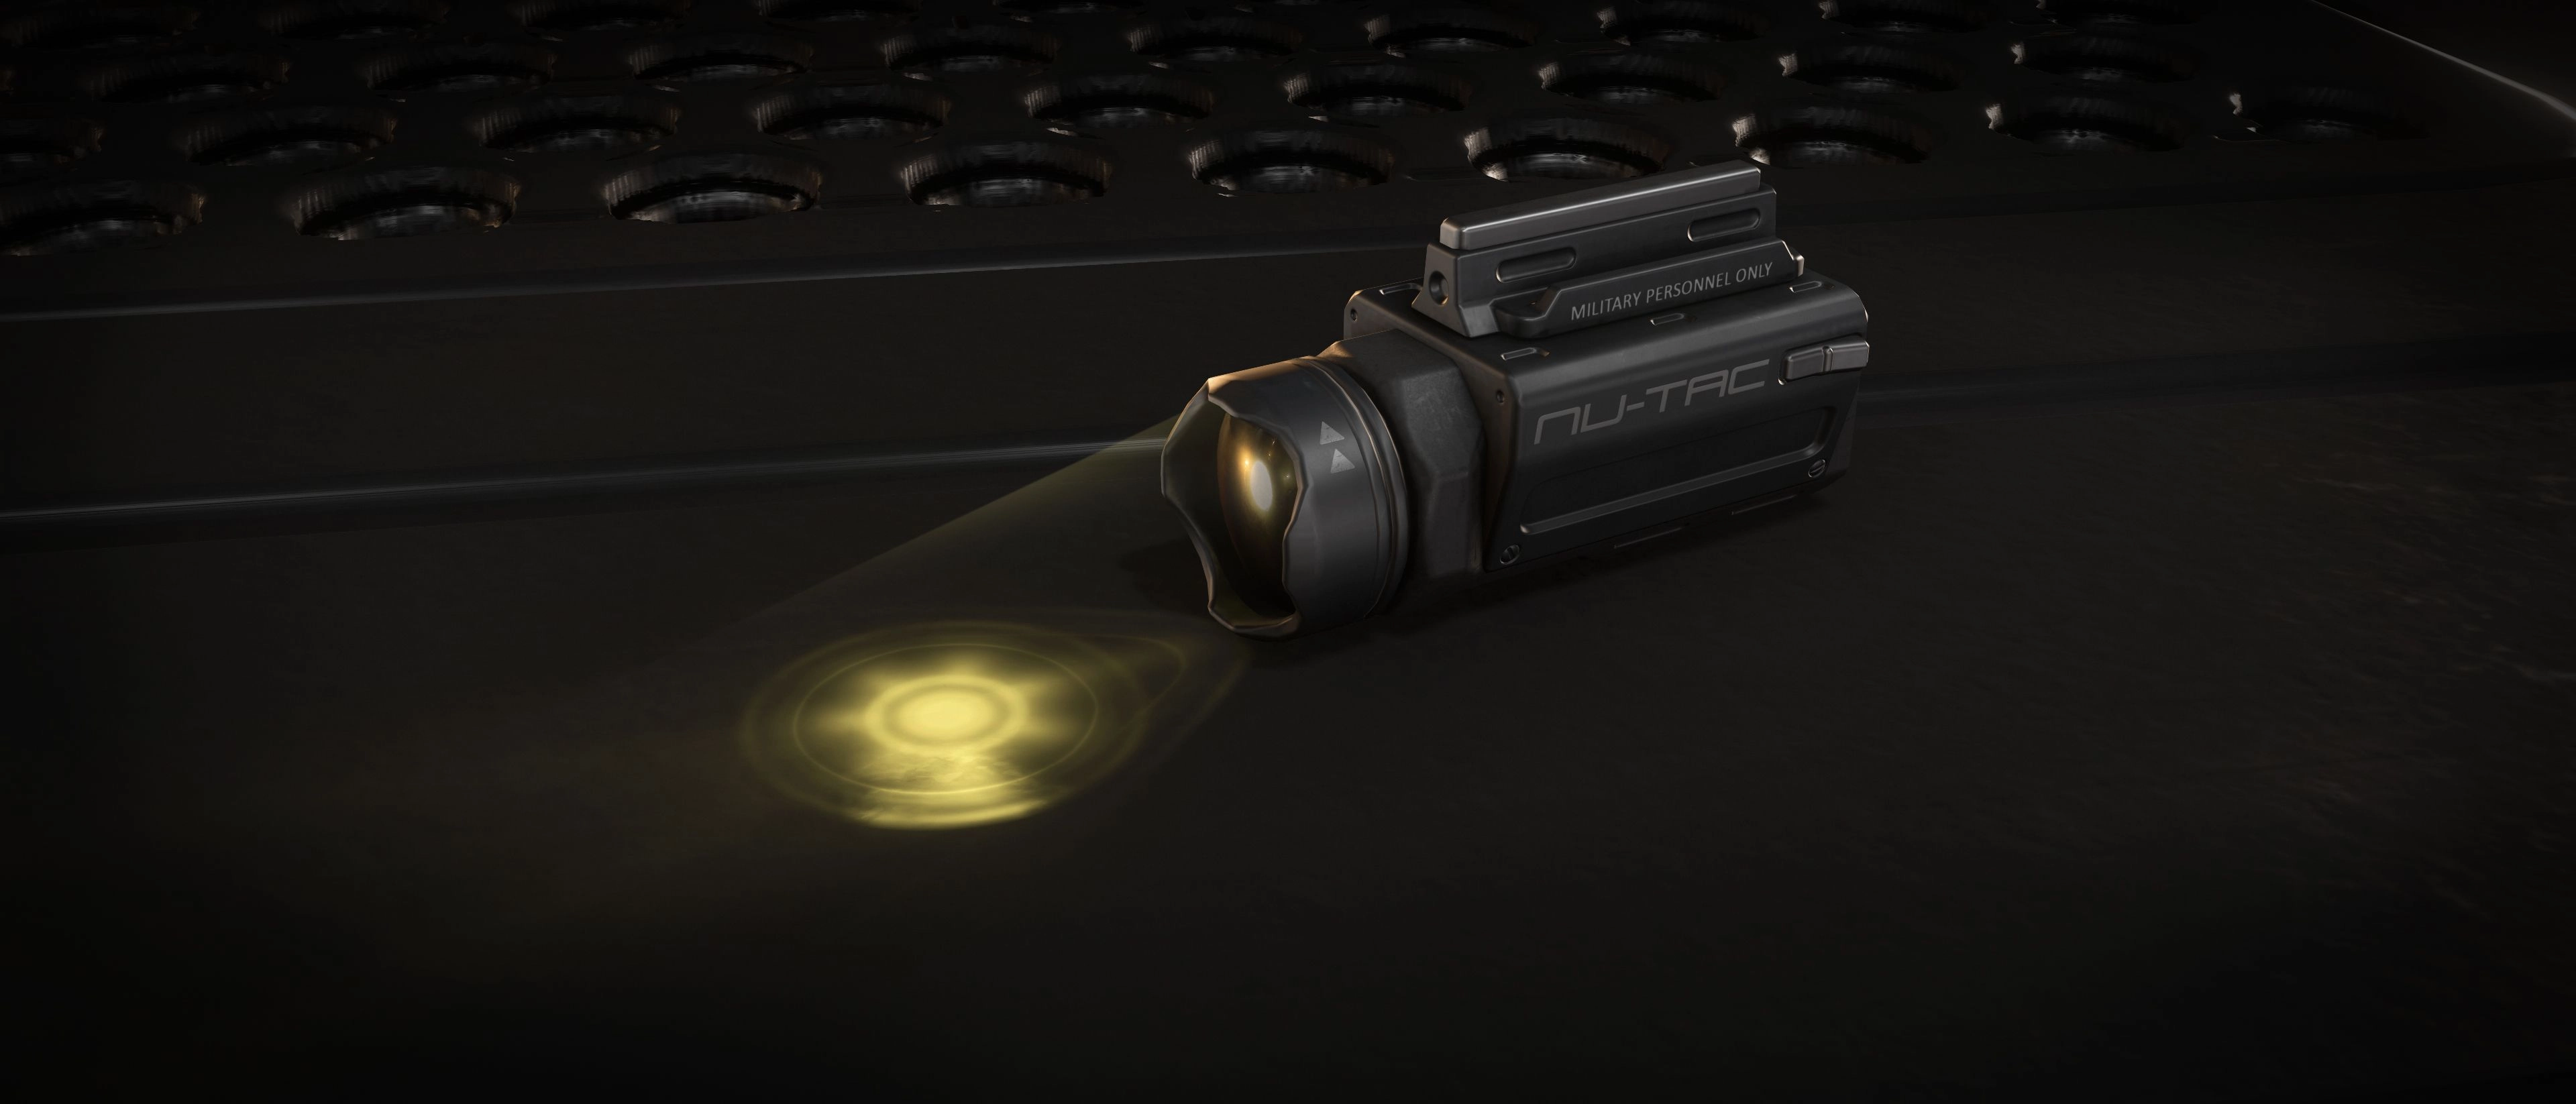 Subscriber flair 2022 may underbarrel attachments YELLOW FINAL